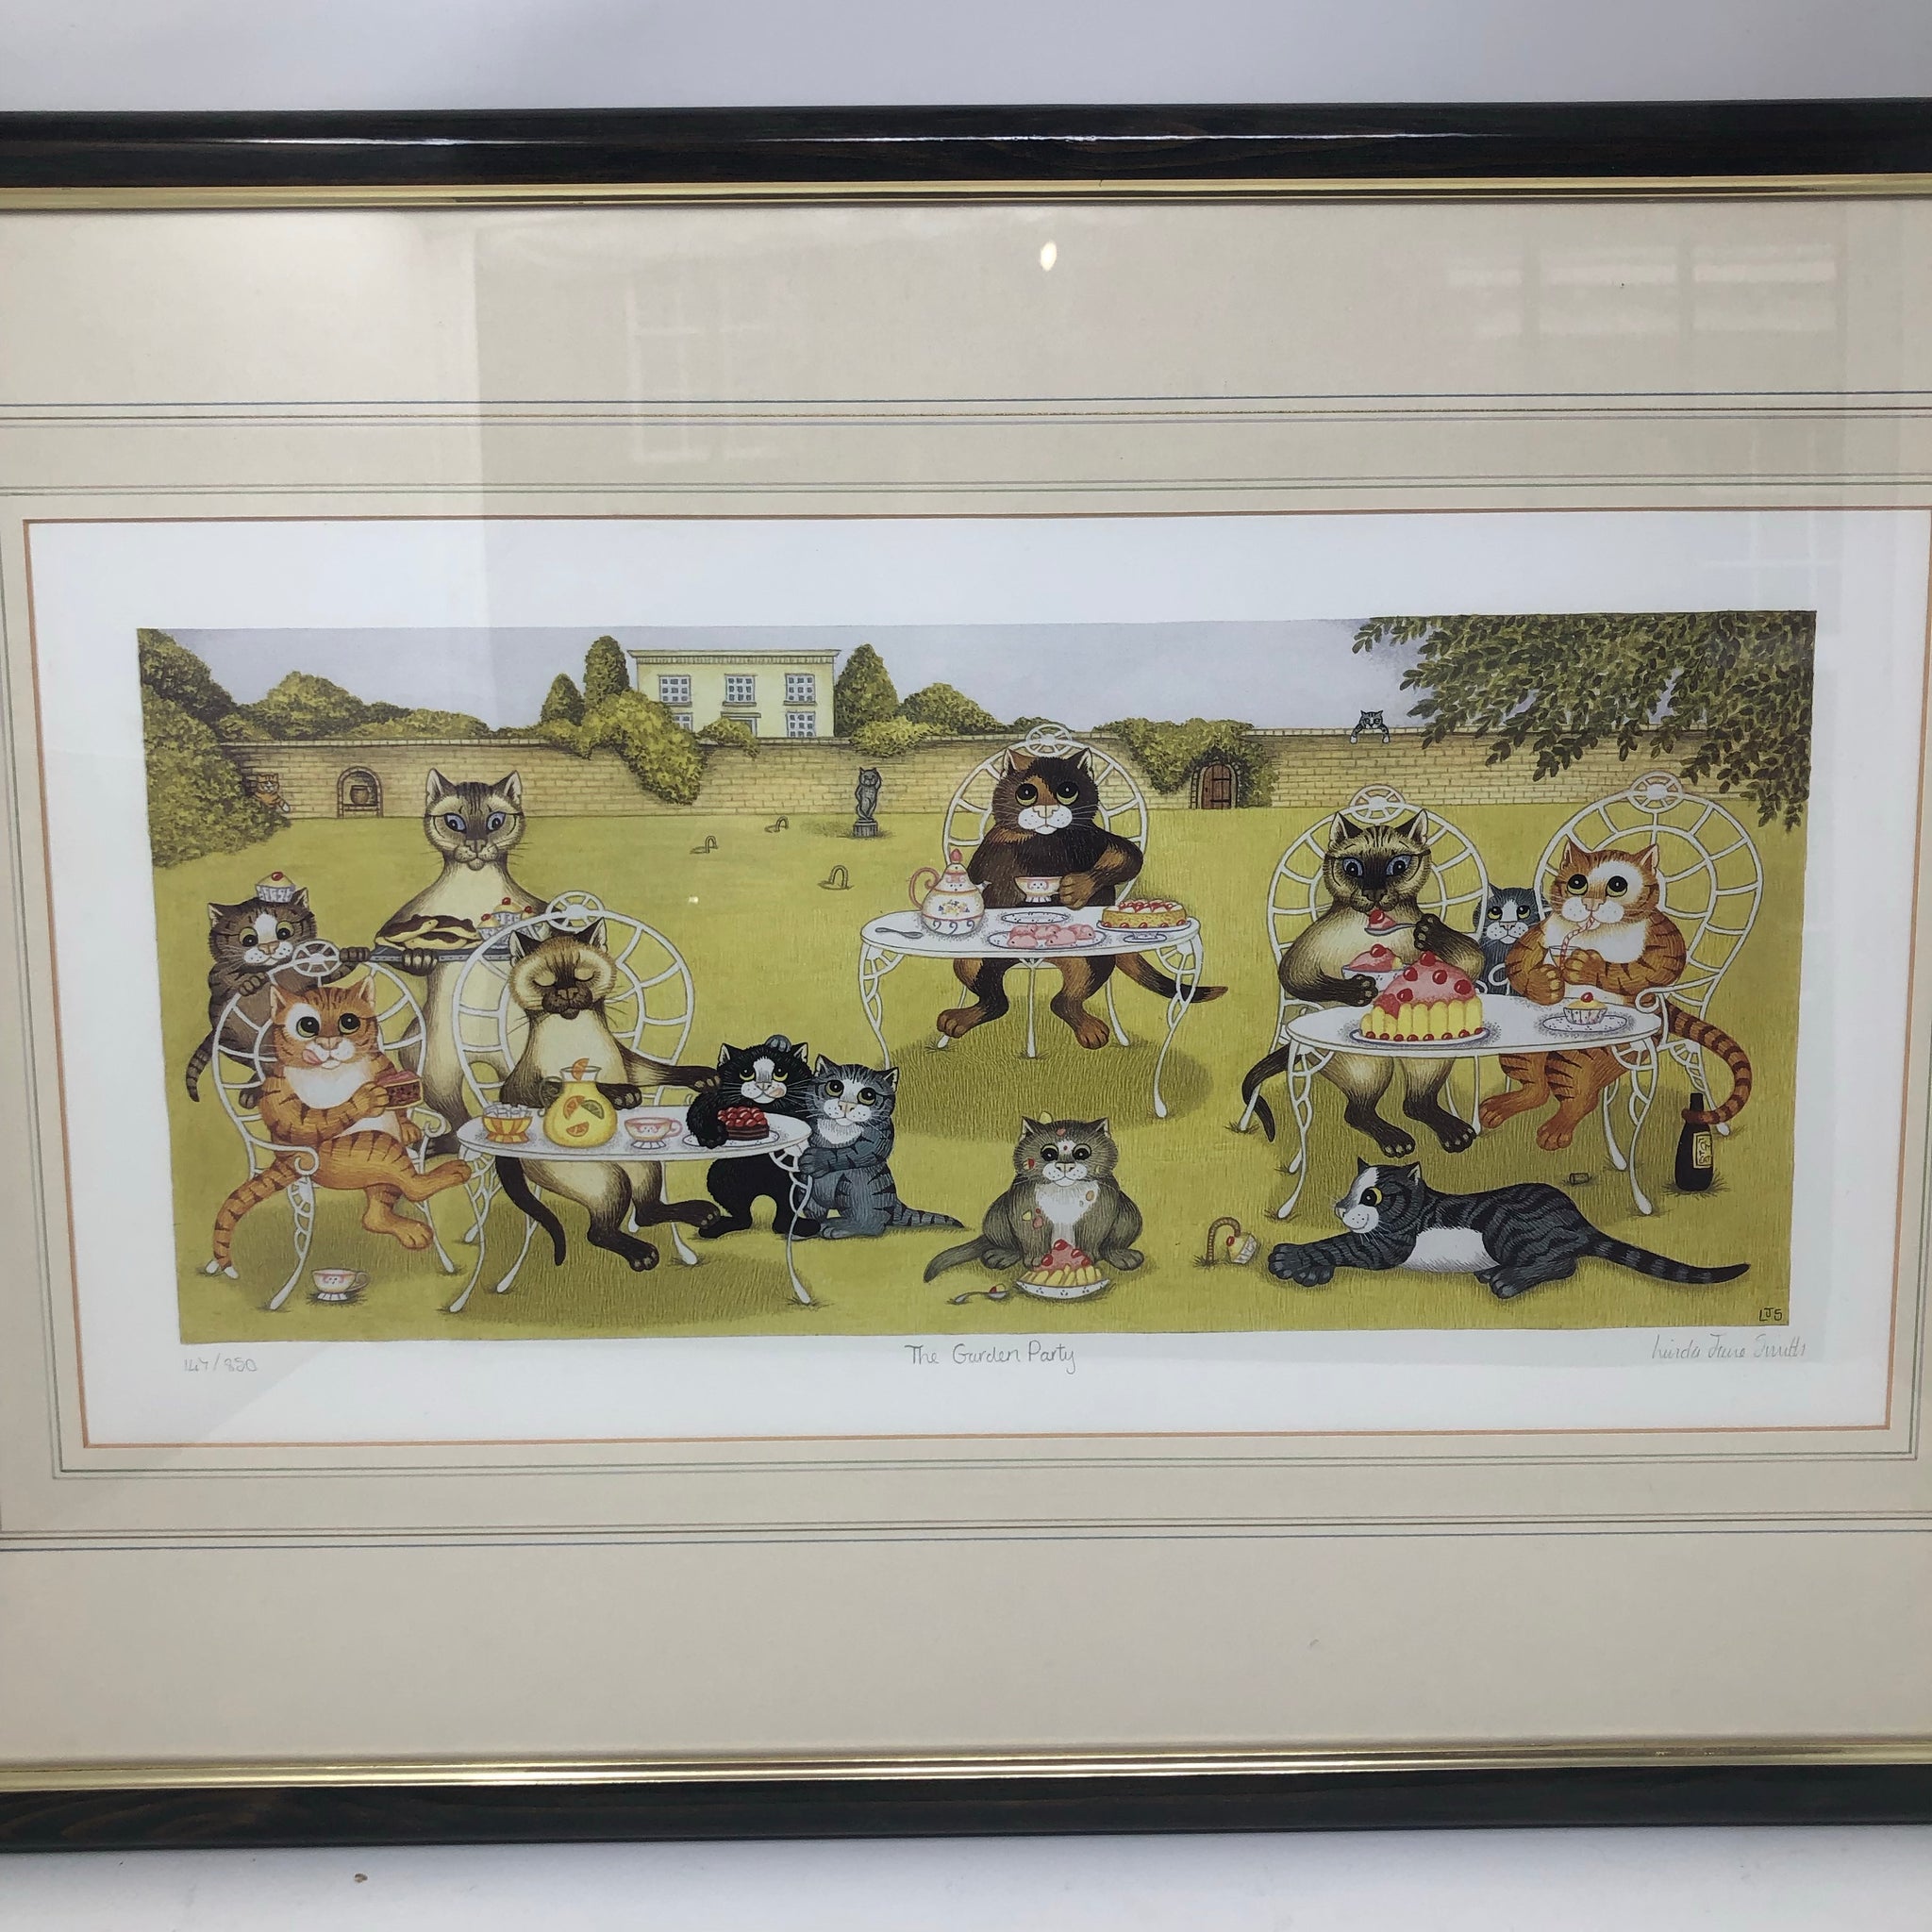 50% OFF Vintage The Garden Party Limited Edition Framed Print by Linda Jane Smith